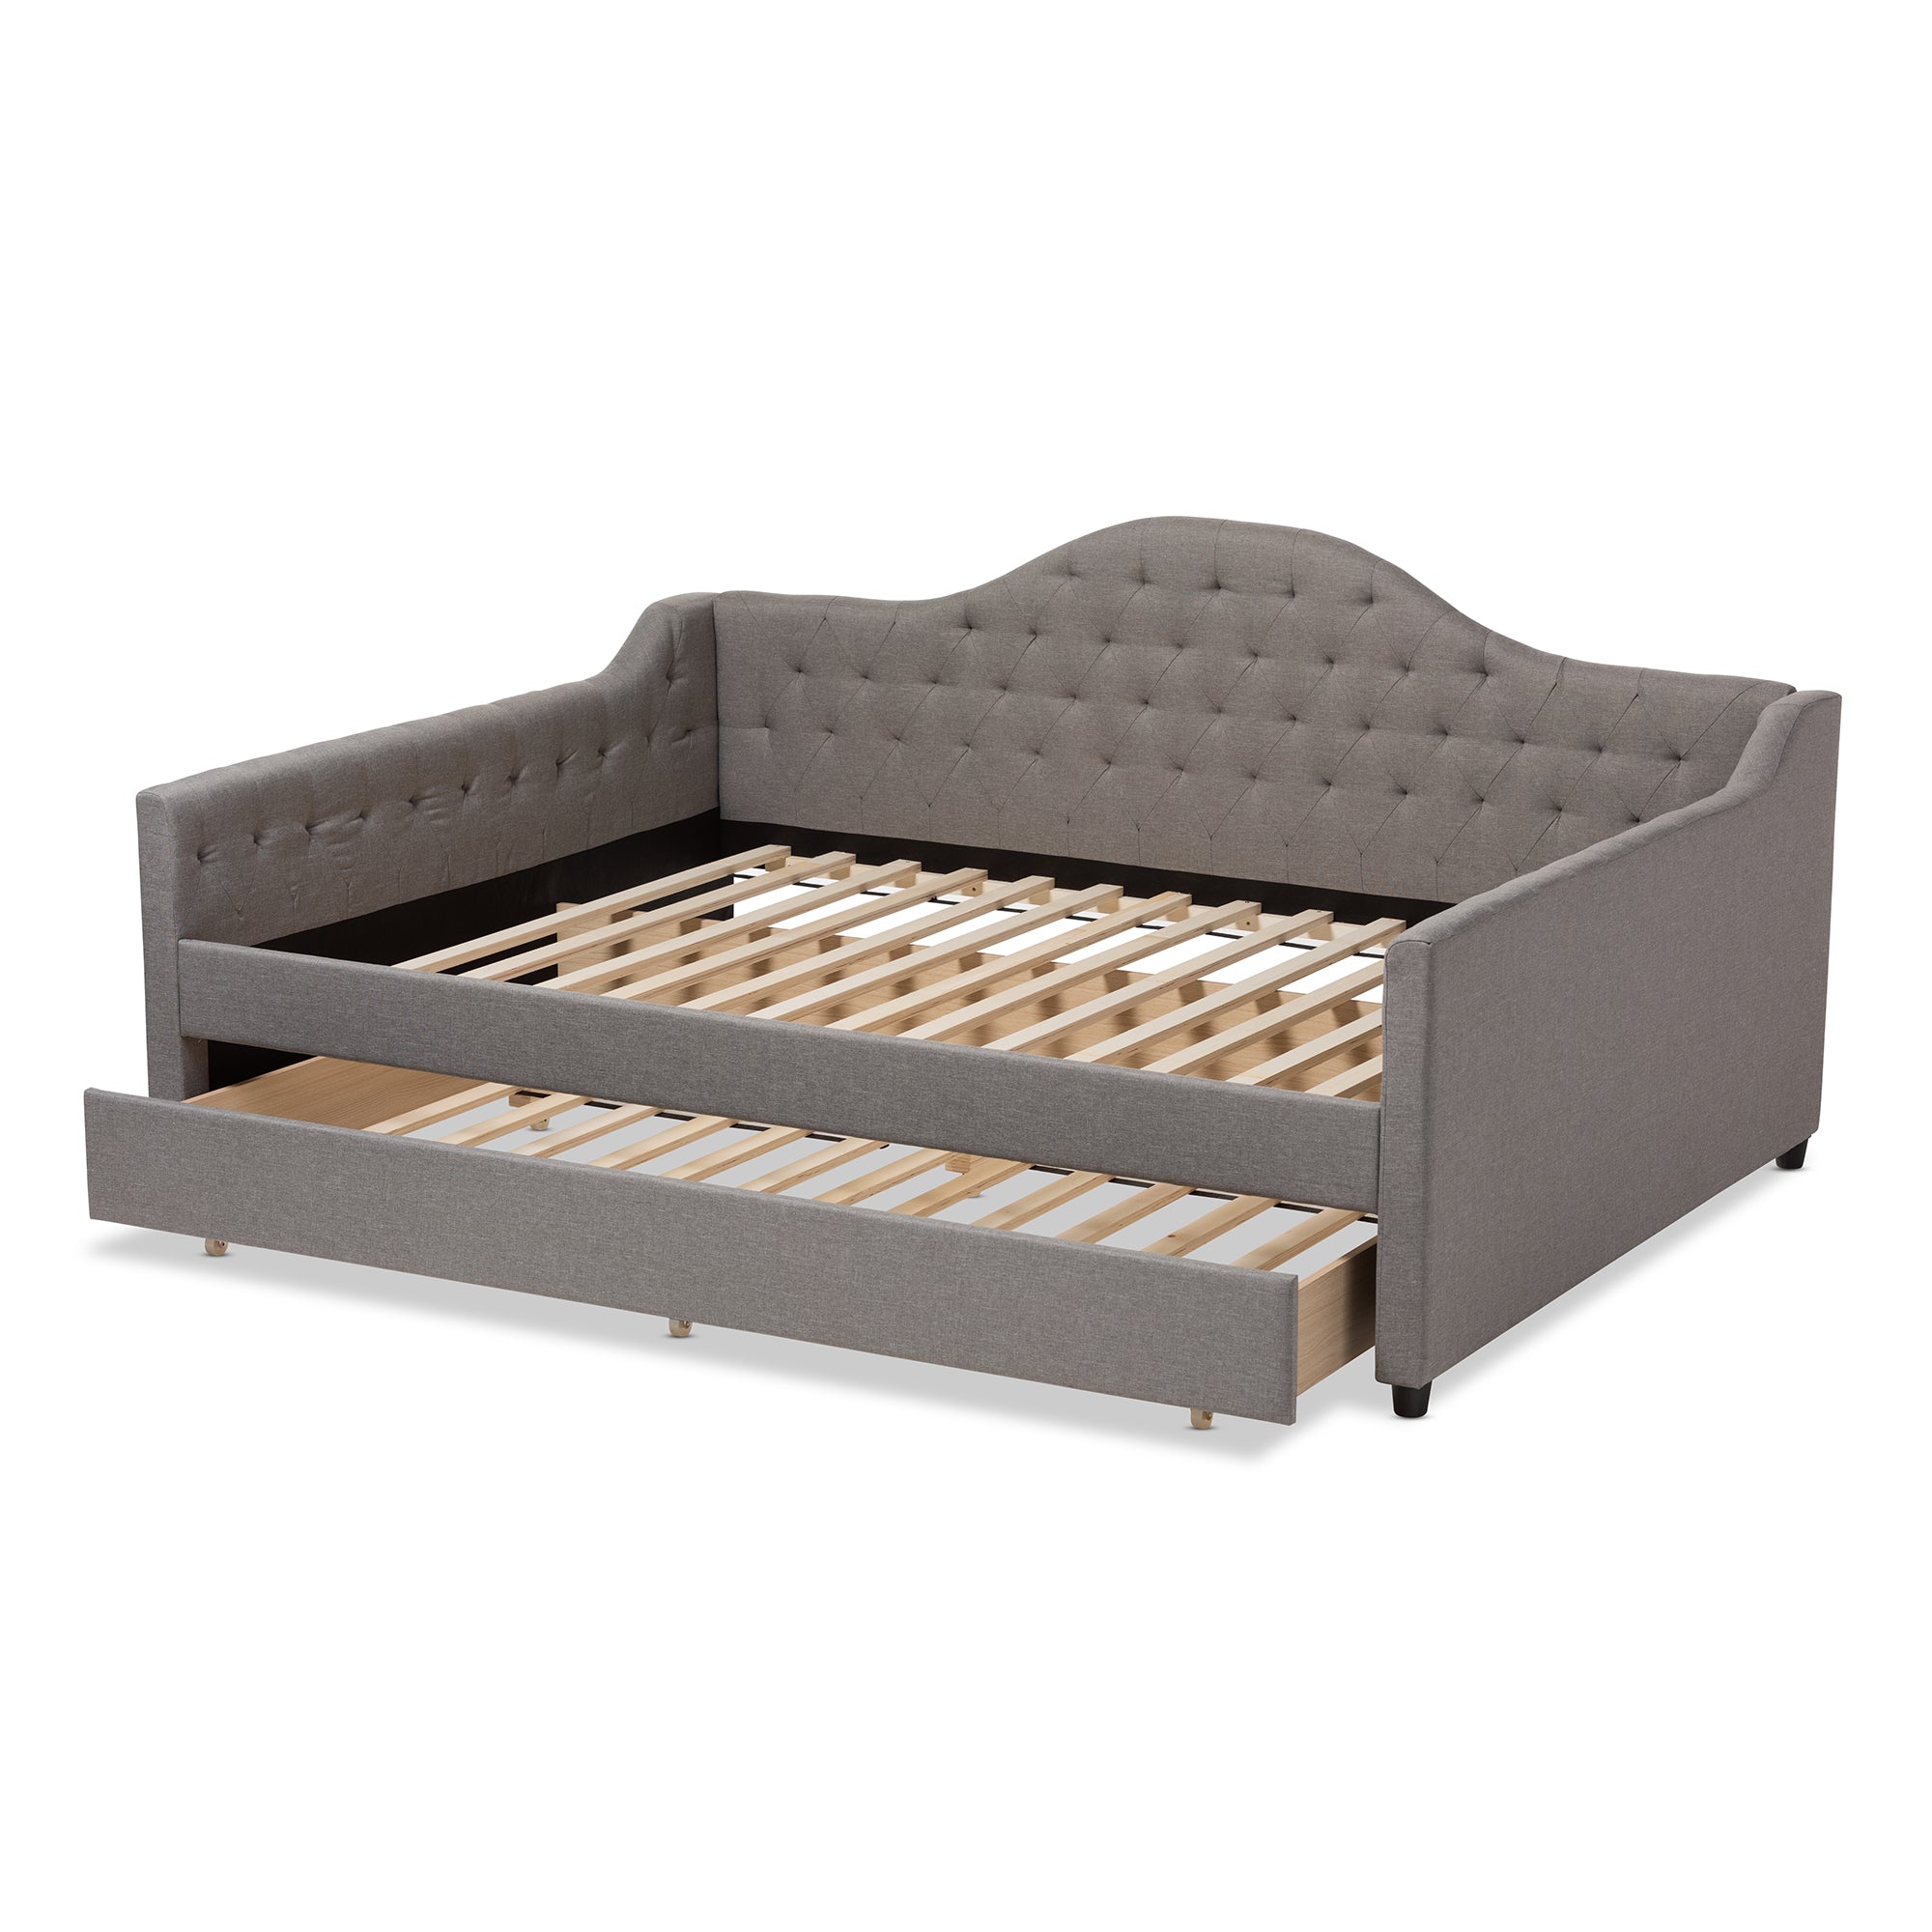 Eliza Contemporary Daybed with Trundle-Daybed & Trundle-Baxton Studio - WI-Wall2Wall Furnishings